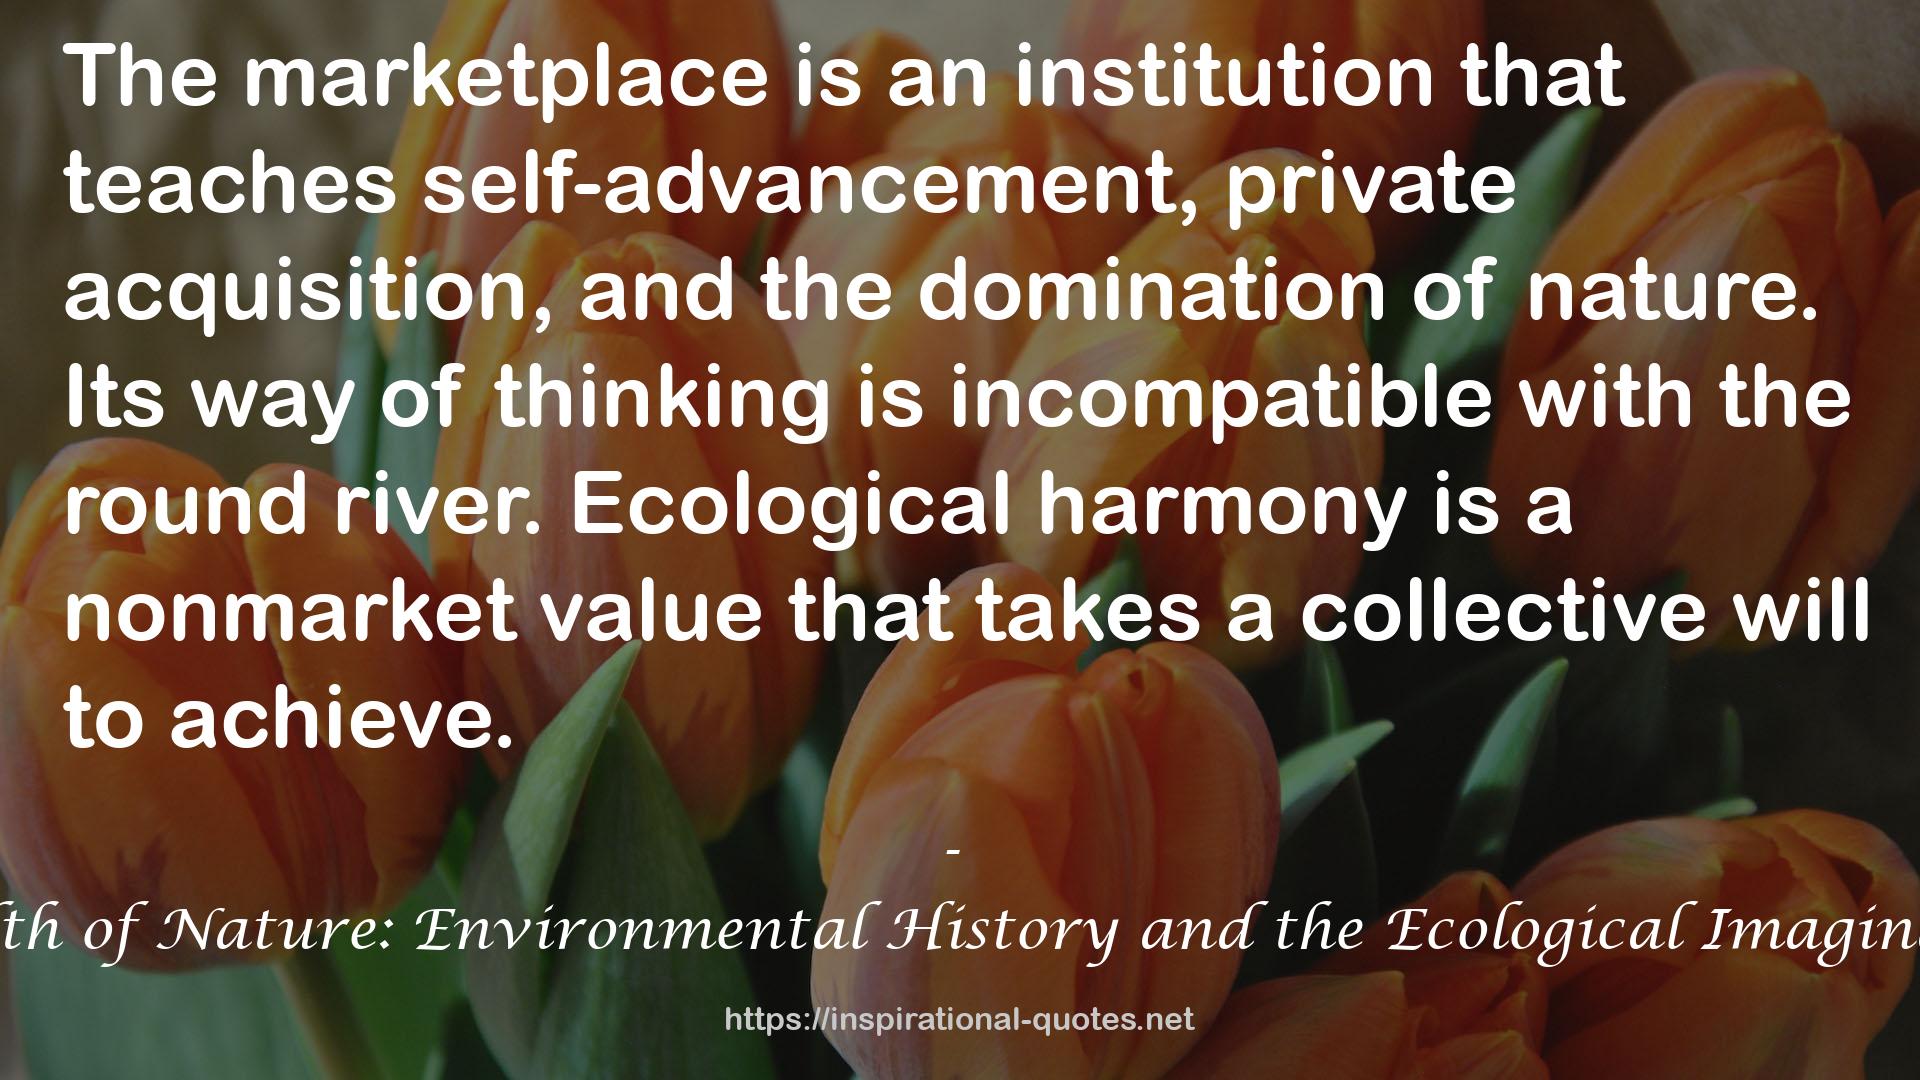 Wealth of Nature: Environmental History and the Ecological Imagination QUOTES